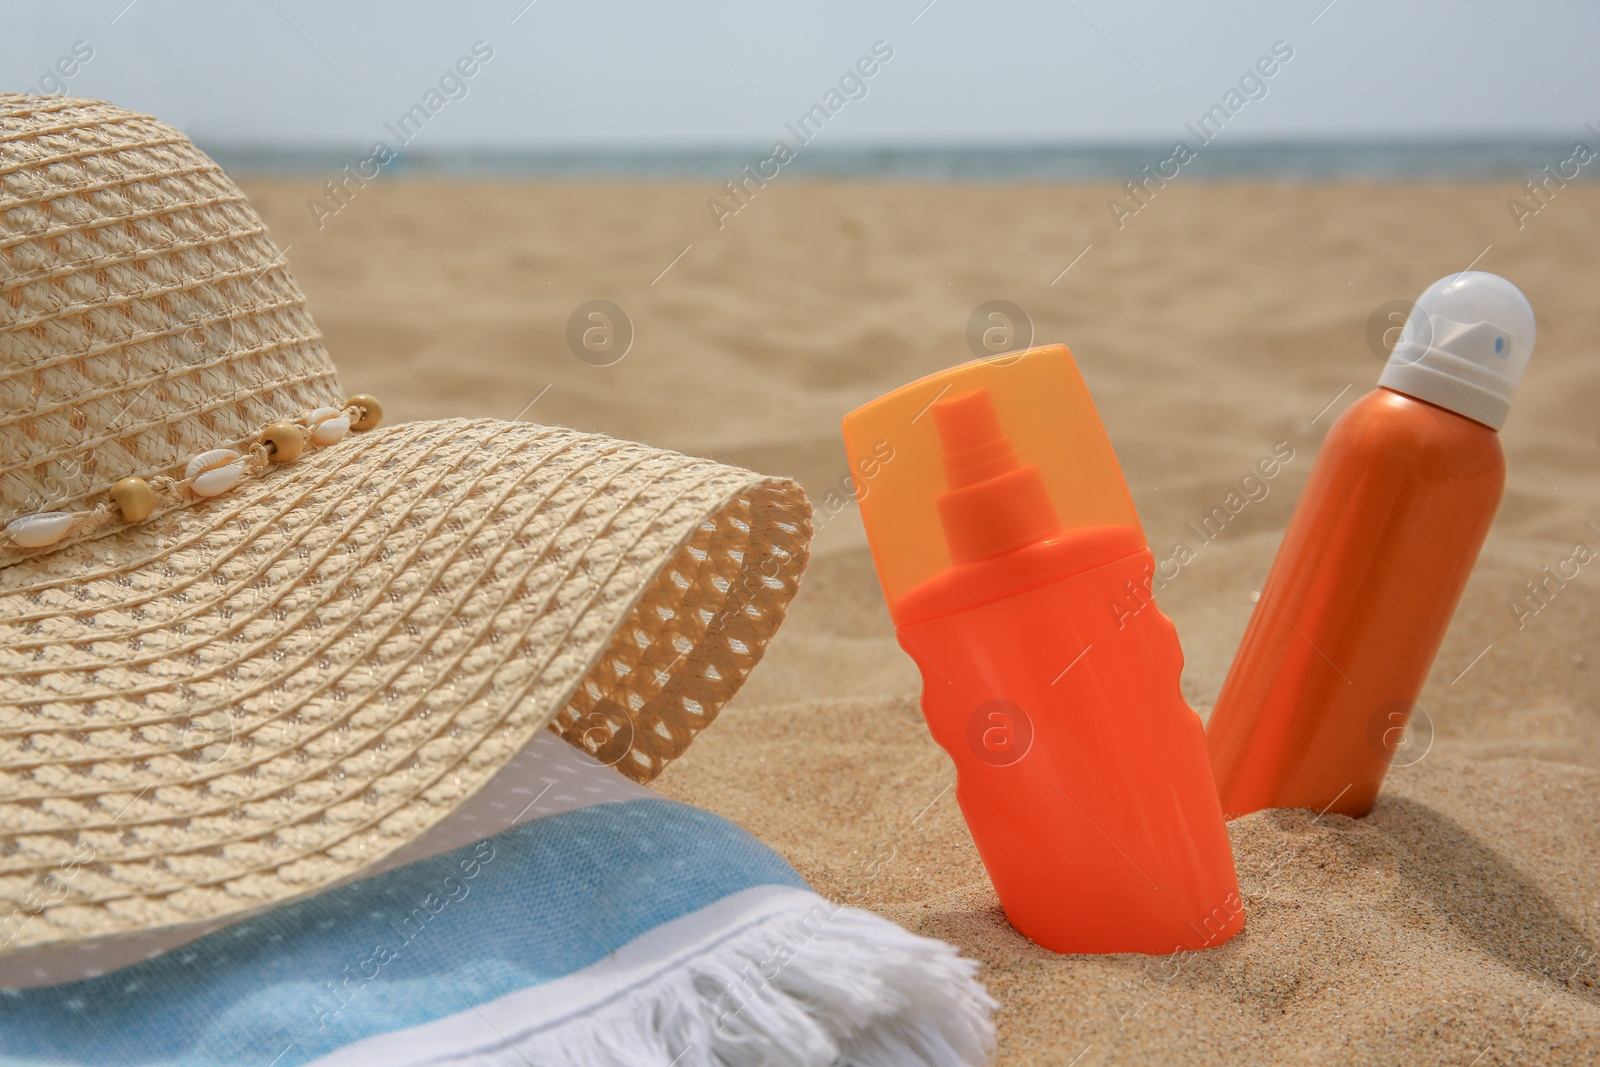 Photo of Sunscreens, hat and towel on sand, closeup. Sun protection care